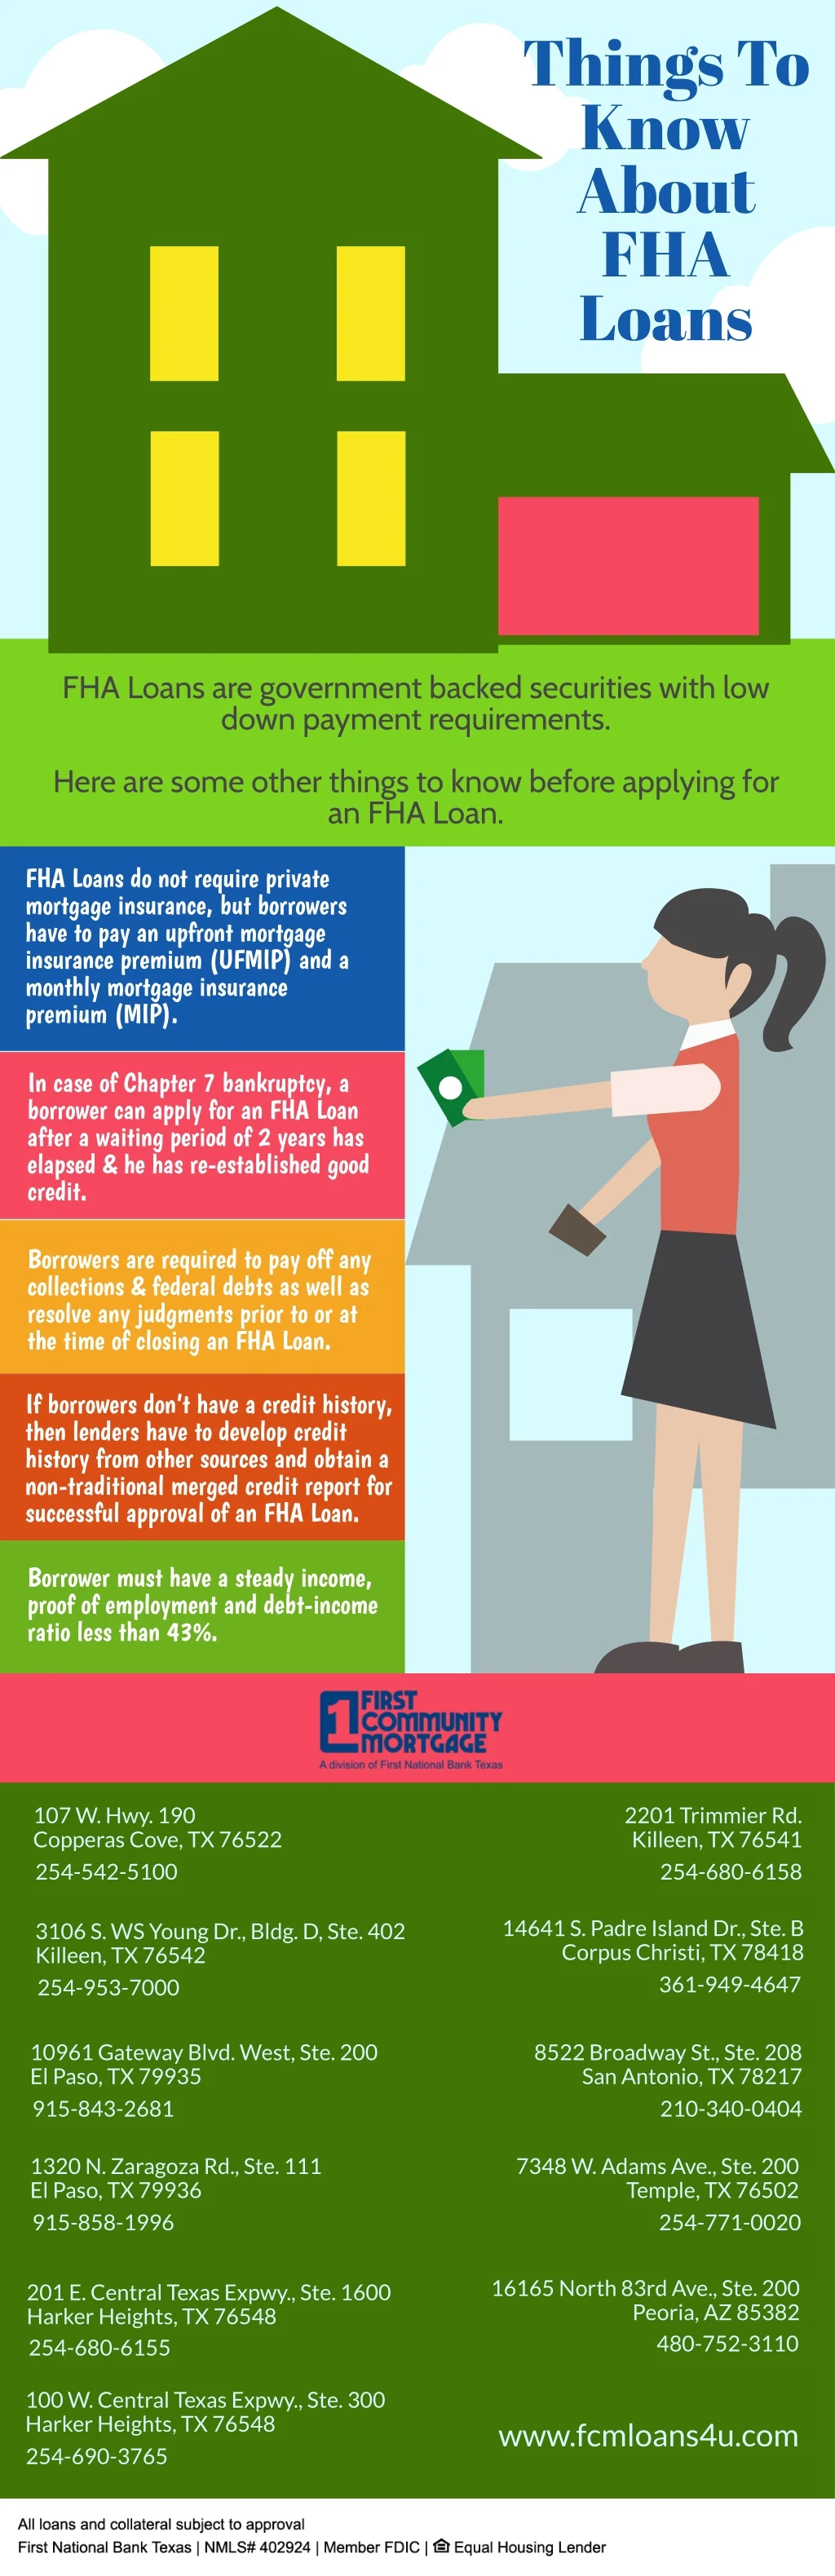 things to know about fha loans